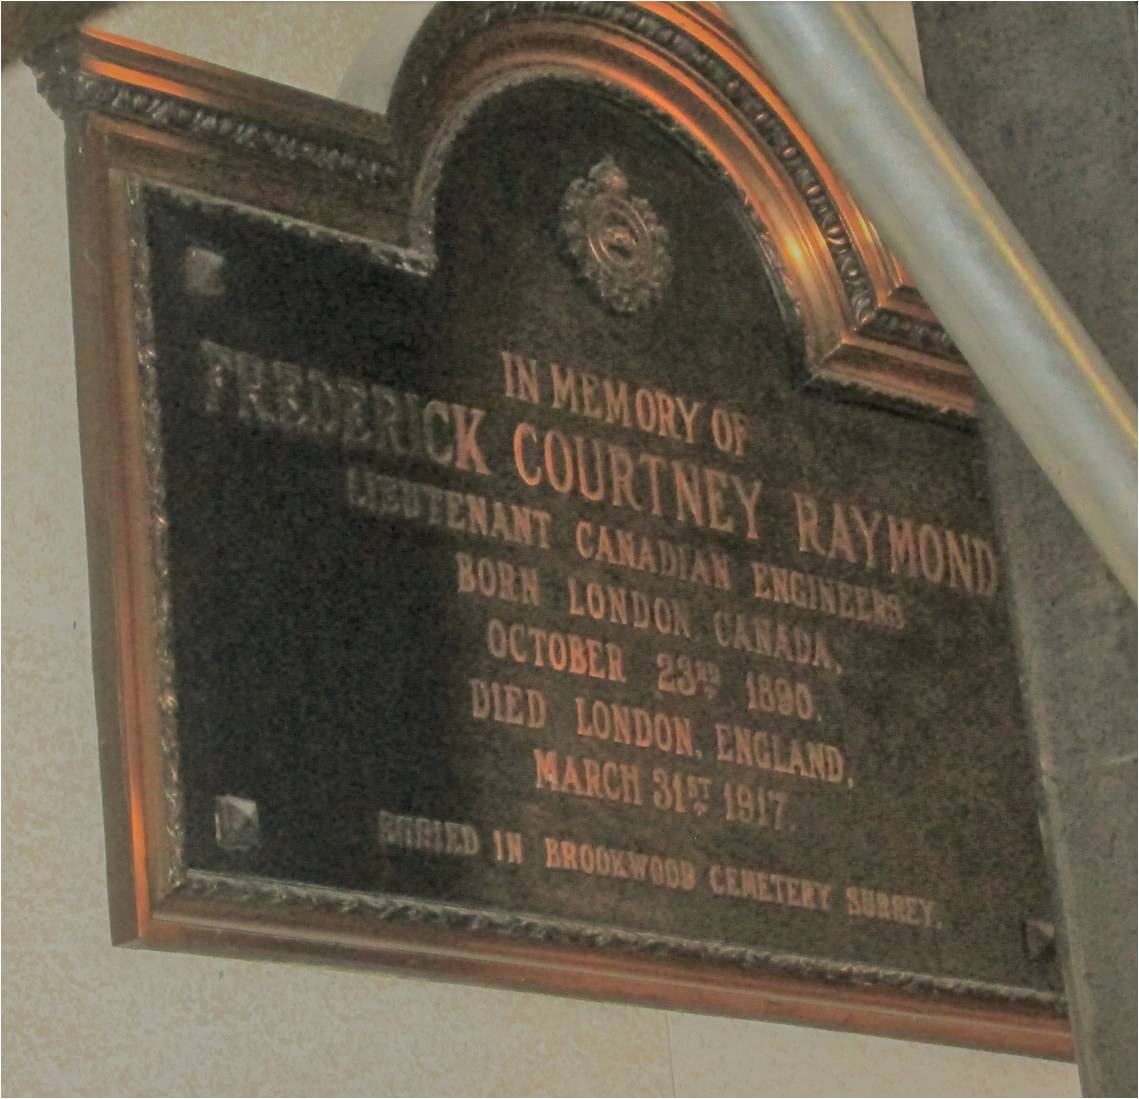 St Paul's Cathedral- Lieutenant Raymond plaque (photo by R. Turcotte)